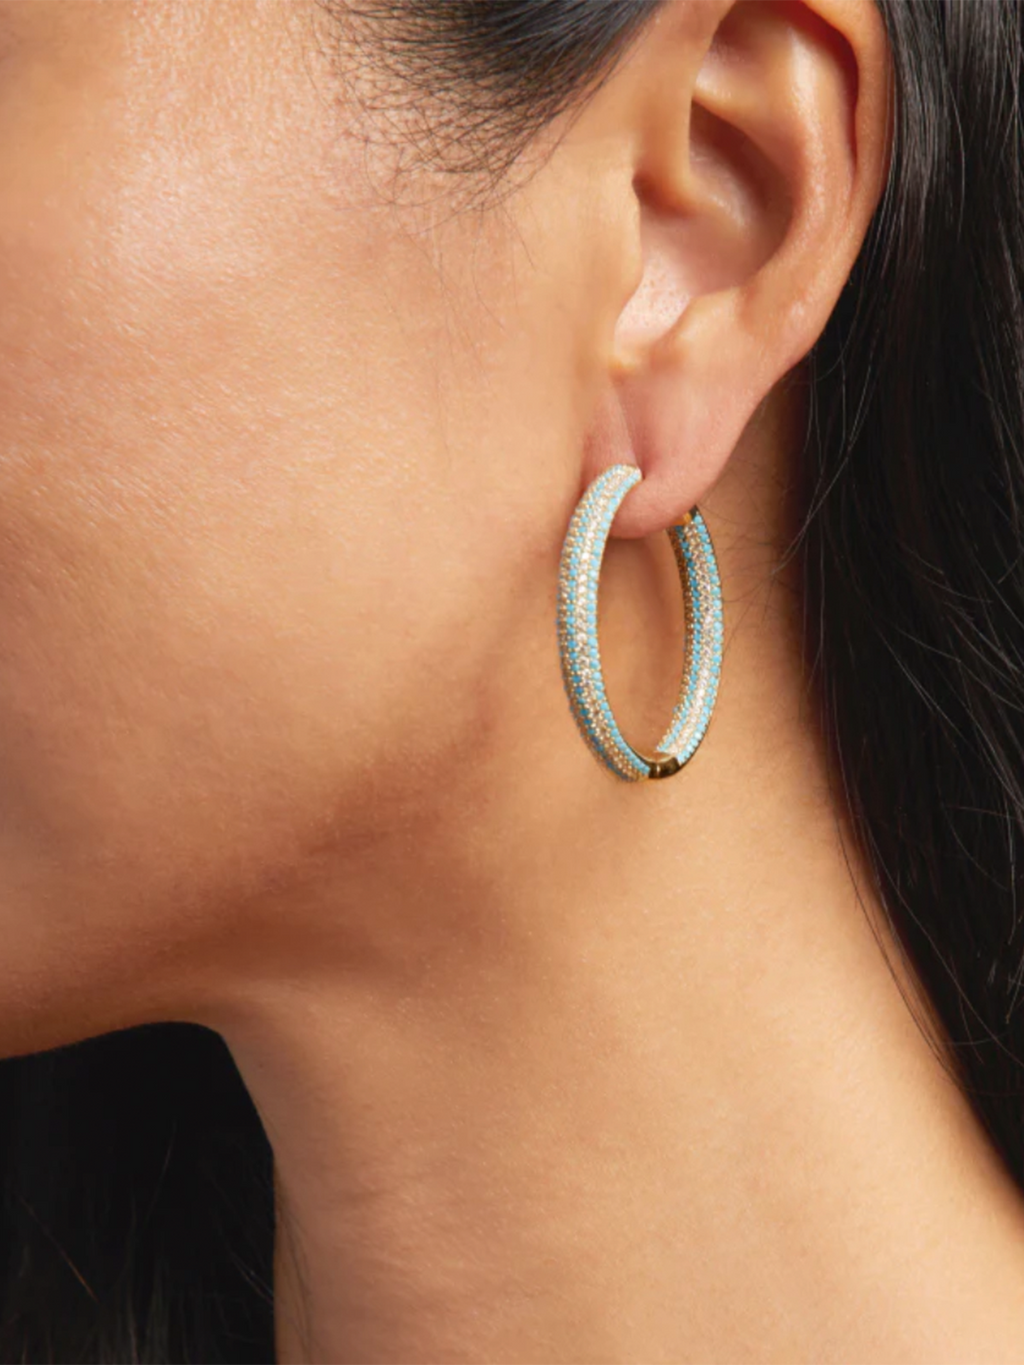 Tire Earring in 14k Gold Vermeil/Turquoise/White